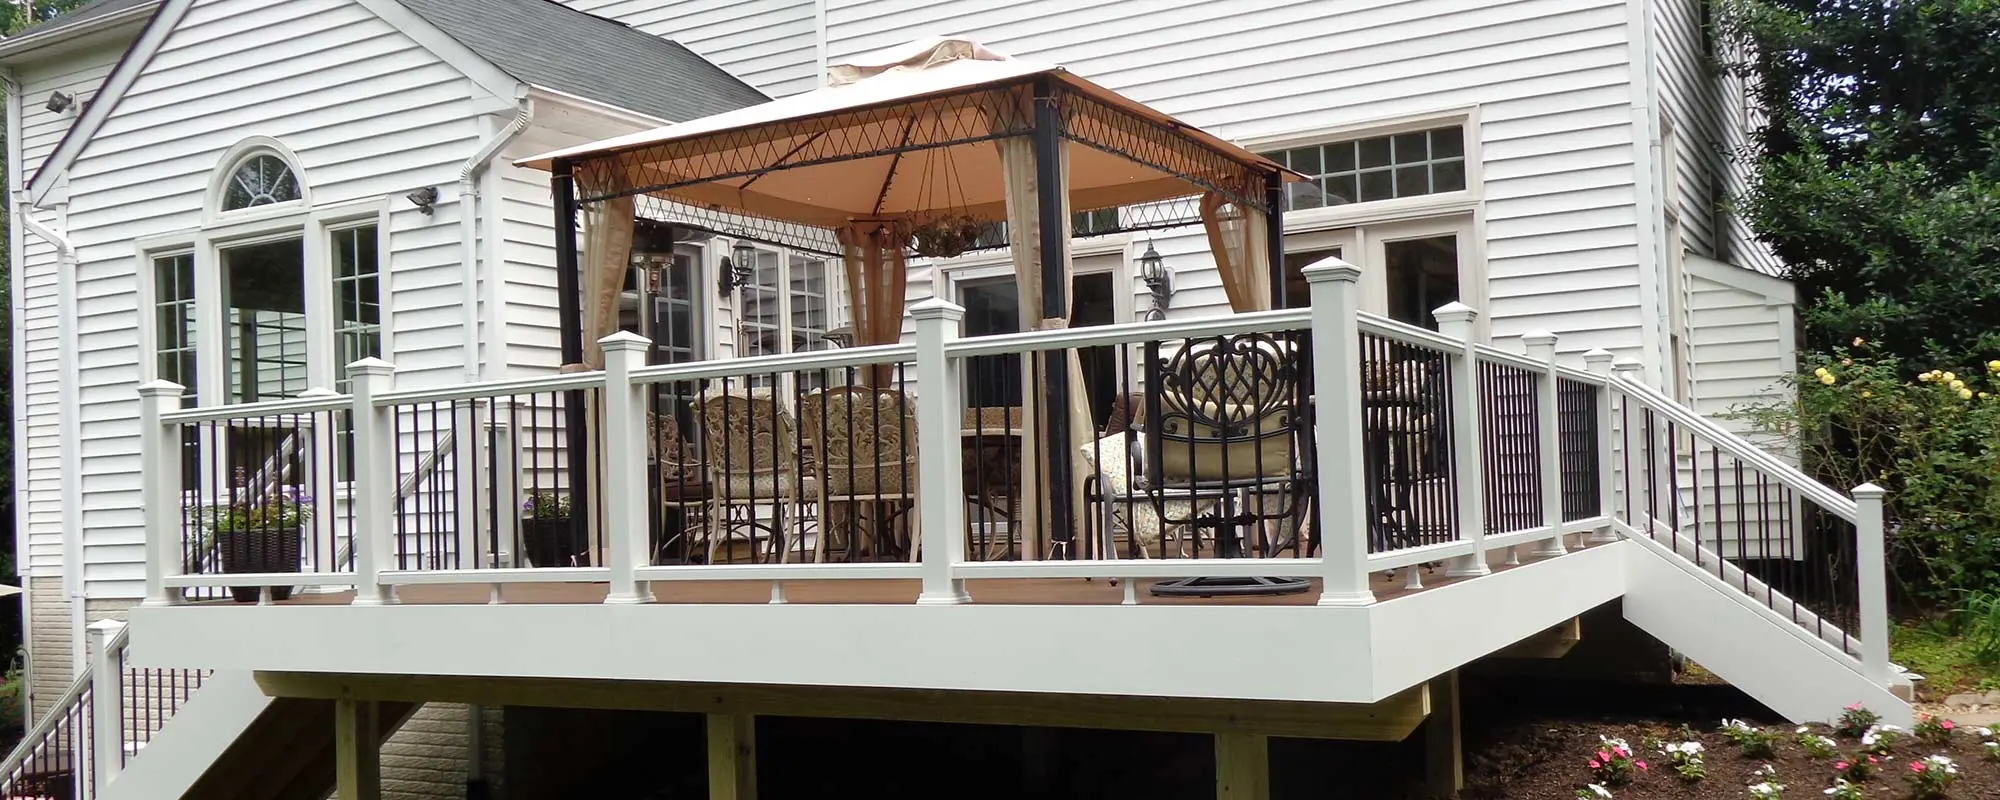 White custom PVC deck awith furniture and drapped canopy